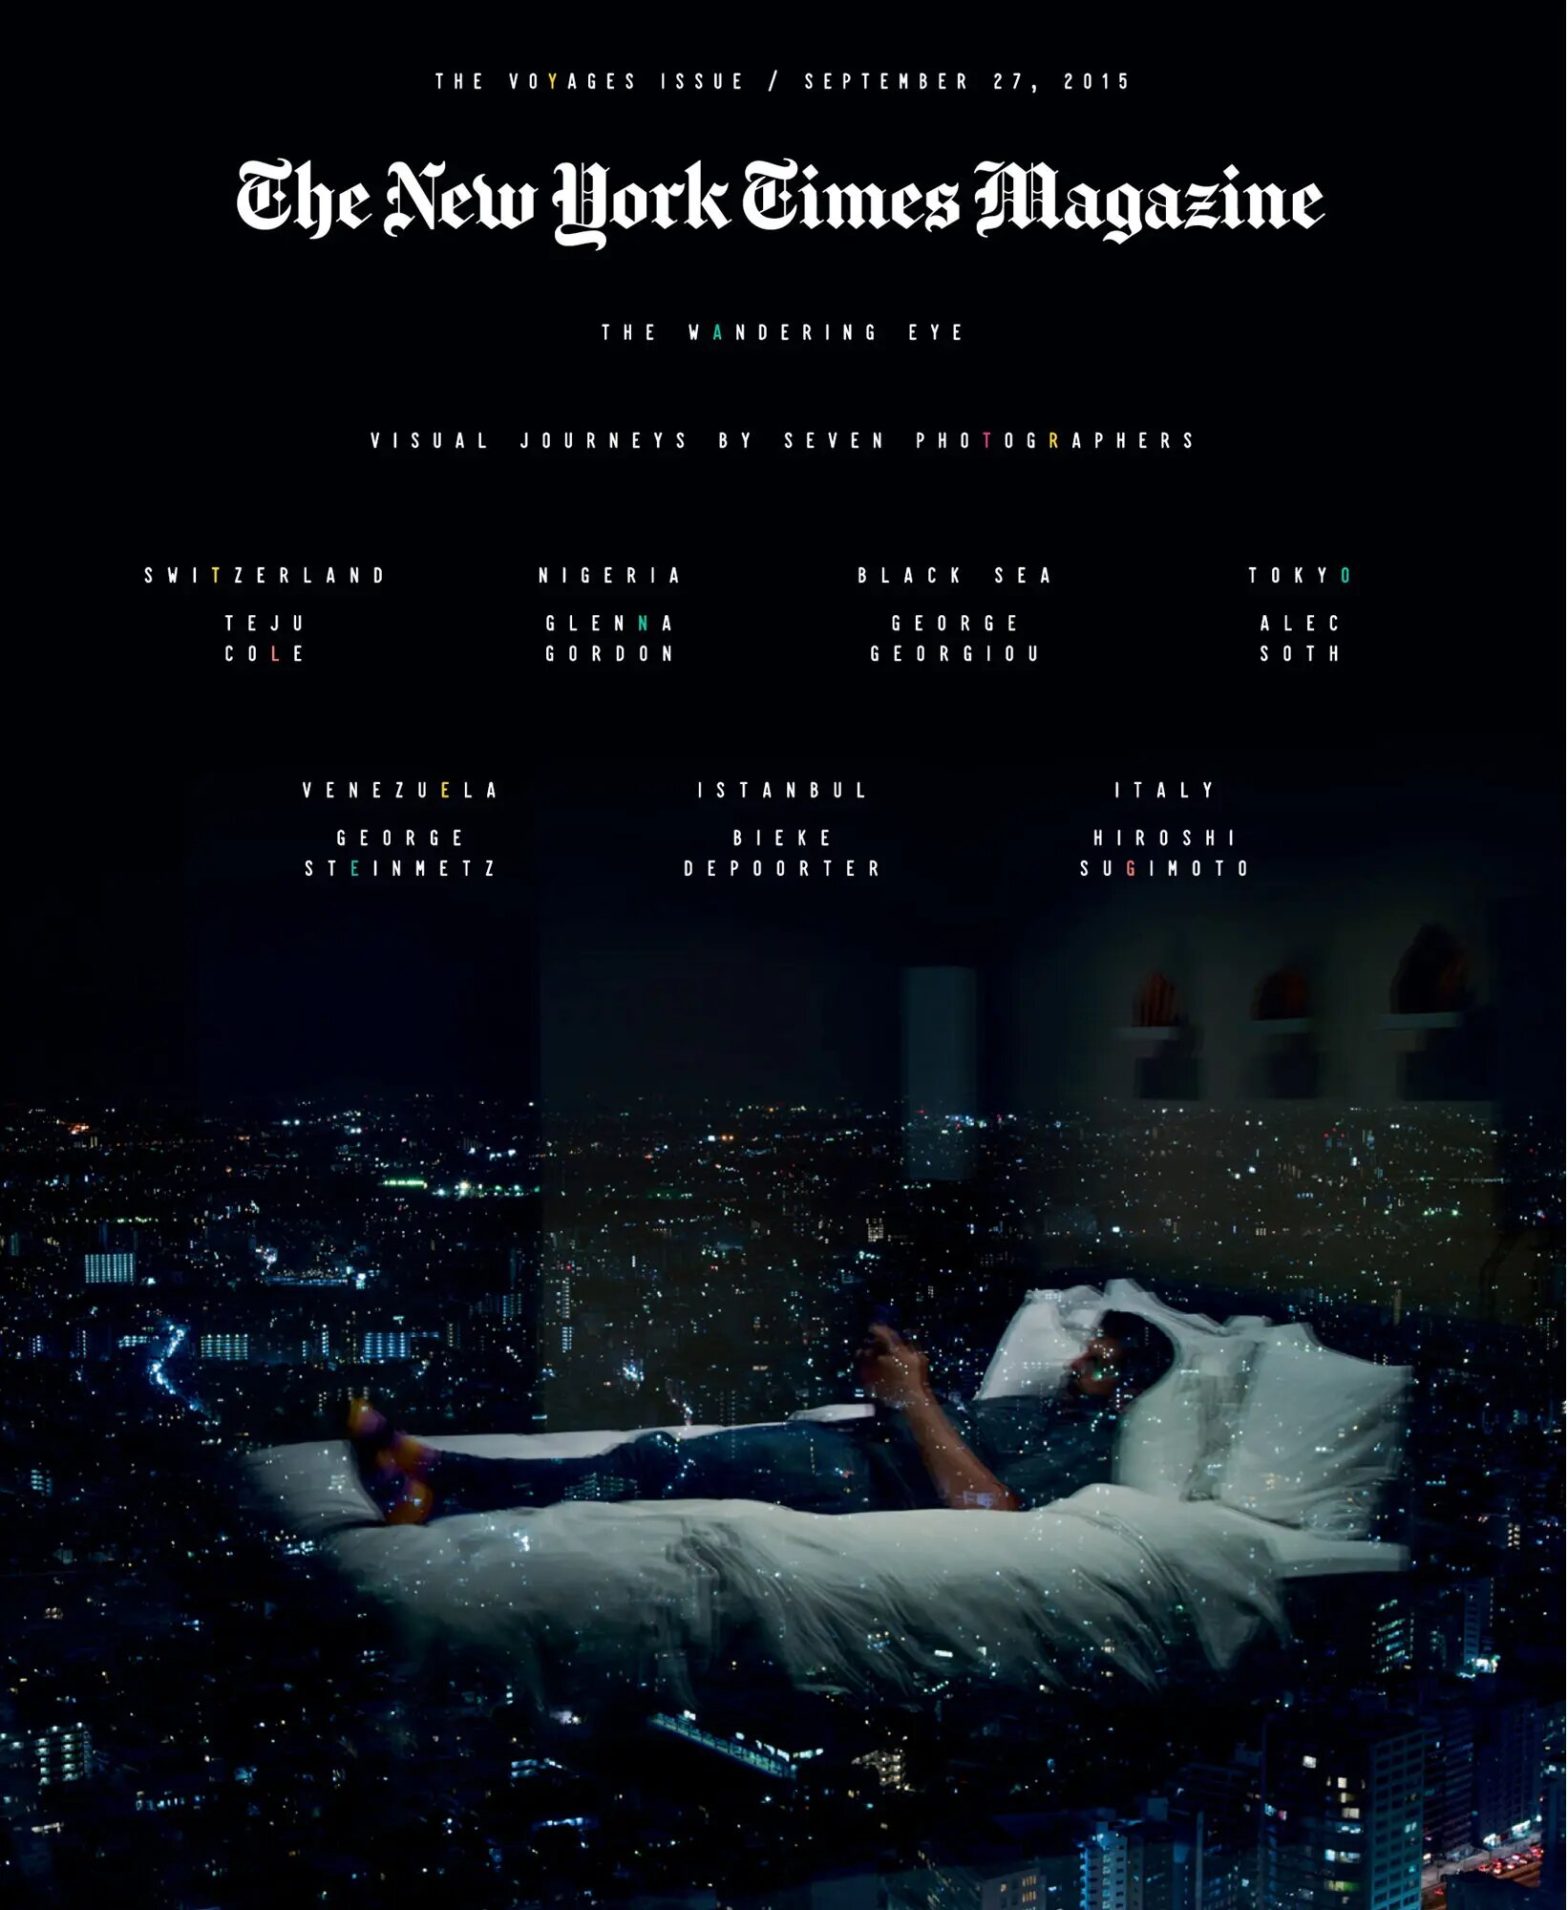 The Voyages Issue The New York Times Magazine